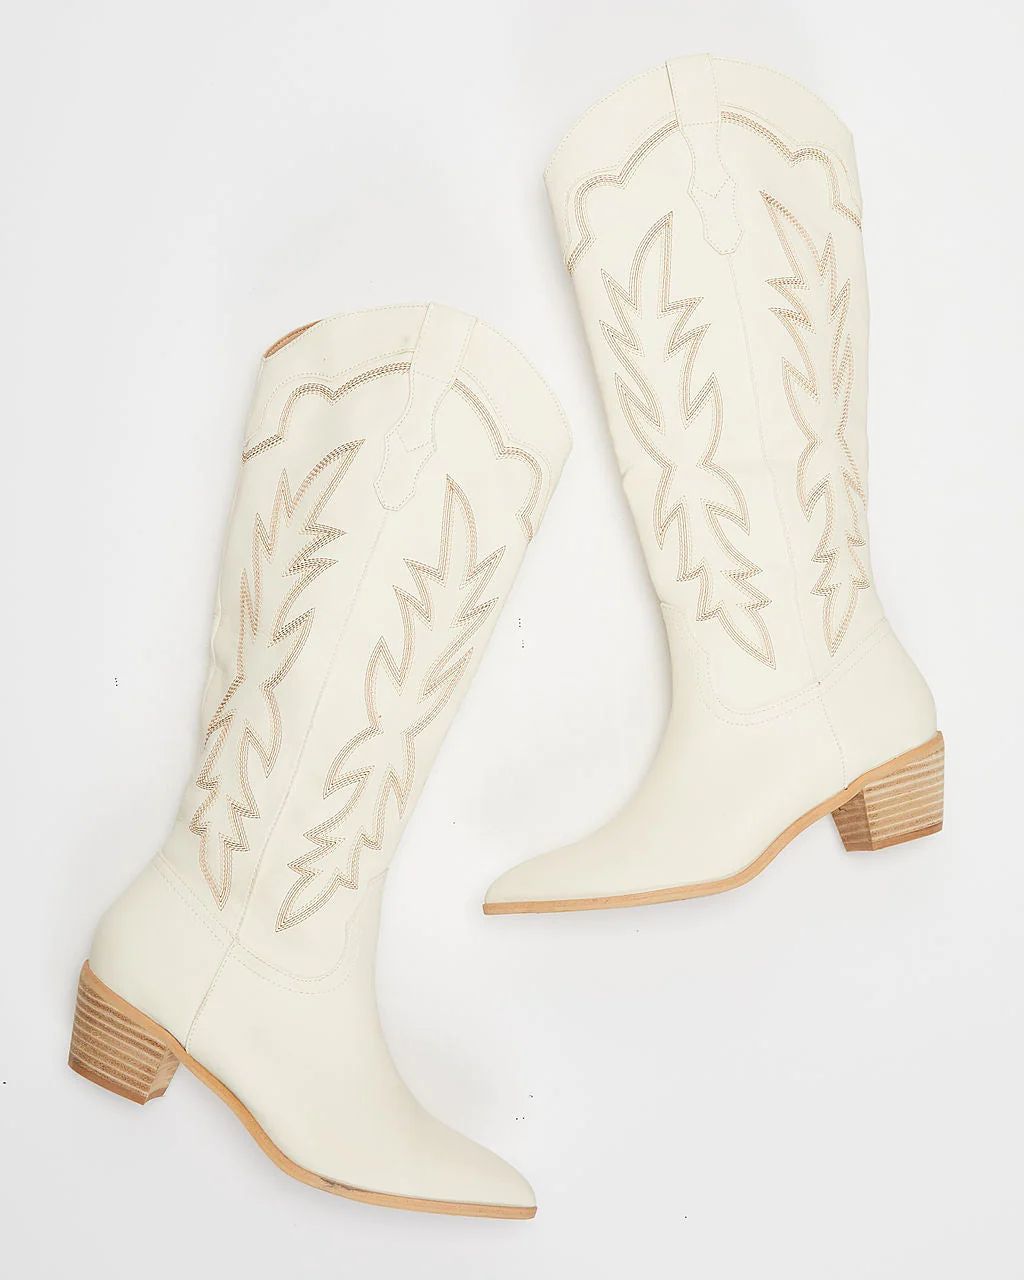 Horseback Heeled Western Boot  Off | VICI Collection